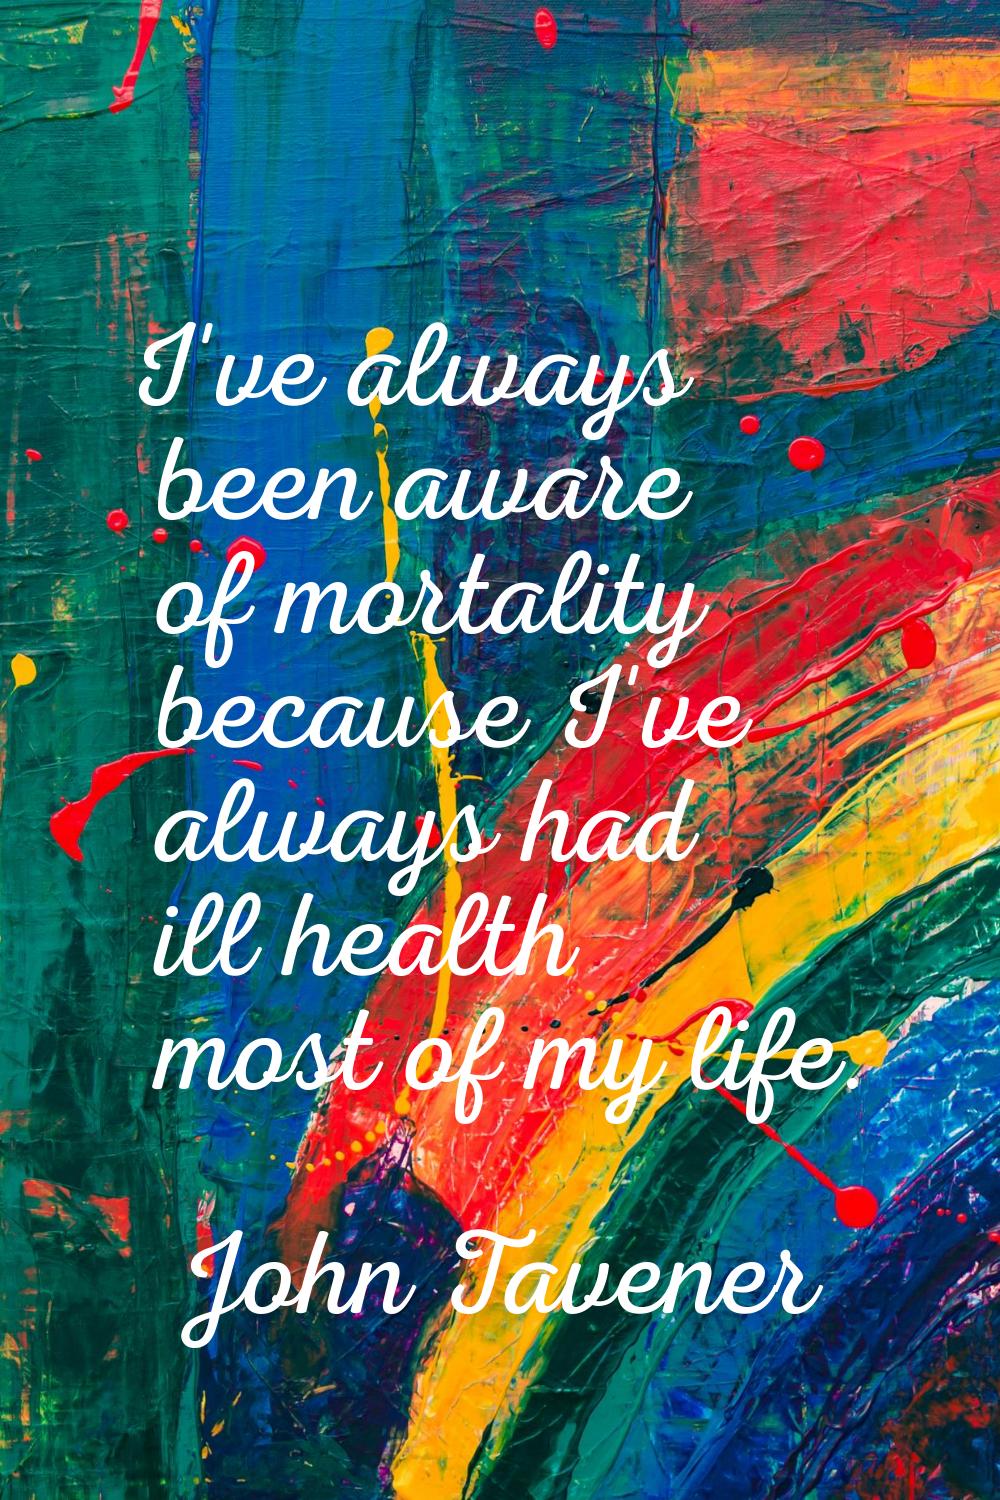 I've always been aware of mortality because I've always had ill health most of my life.